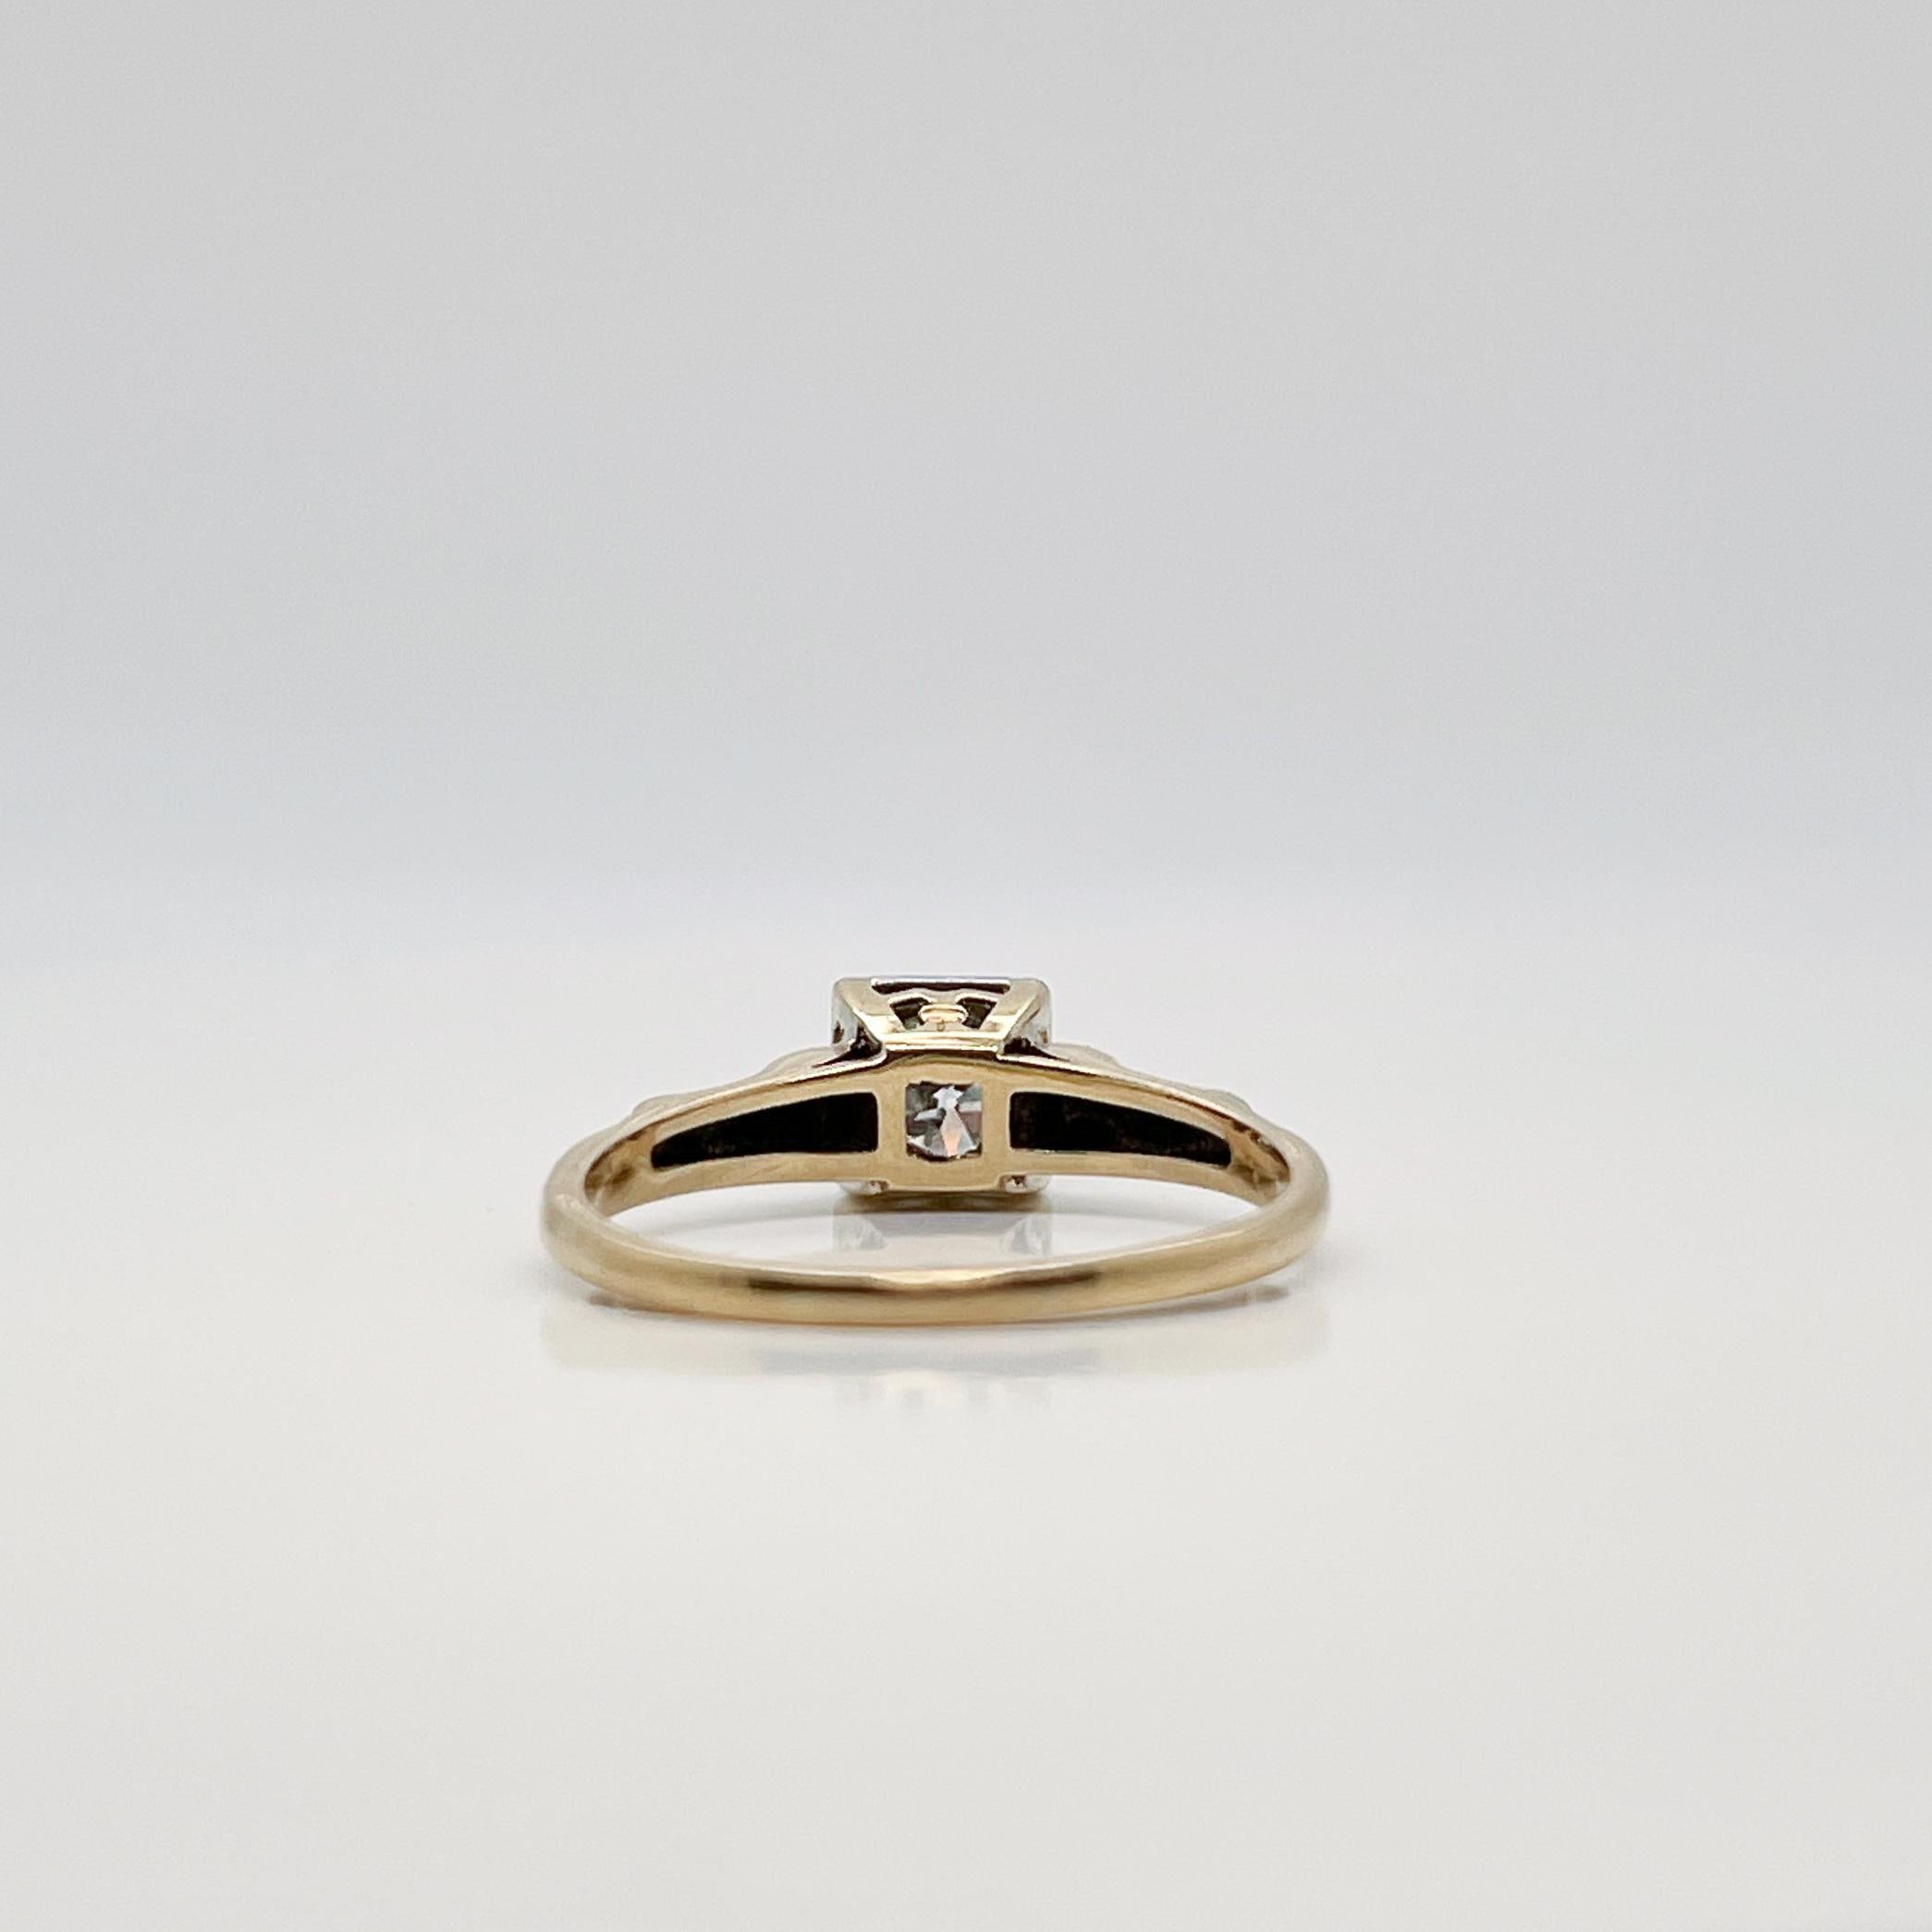 Antique Edwardian 14 Karat Gold & Diamond Engagement Ring In Good Condition For Sale In Philadelphia, PA